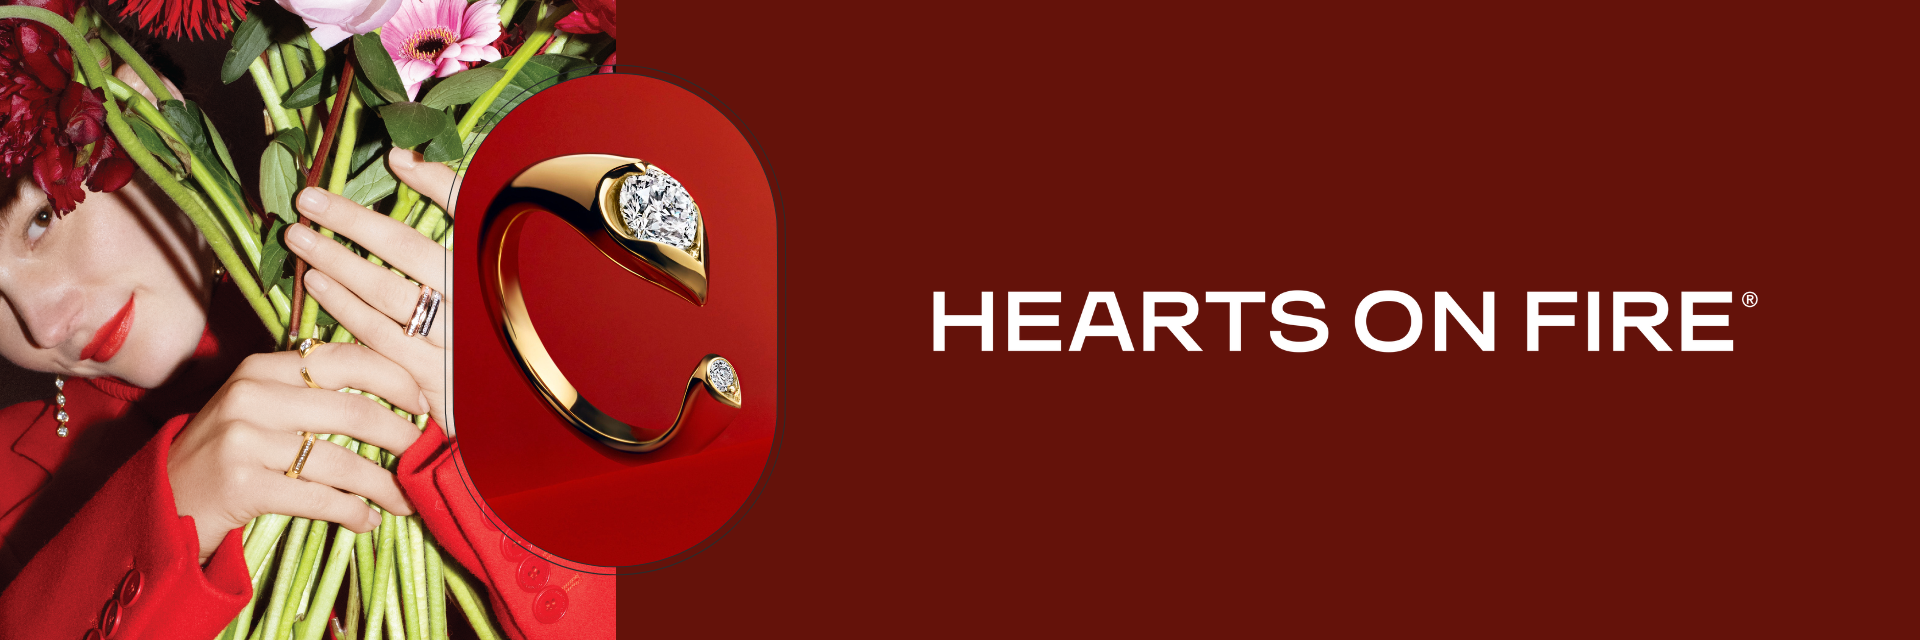 Hearts on Fire banner